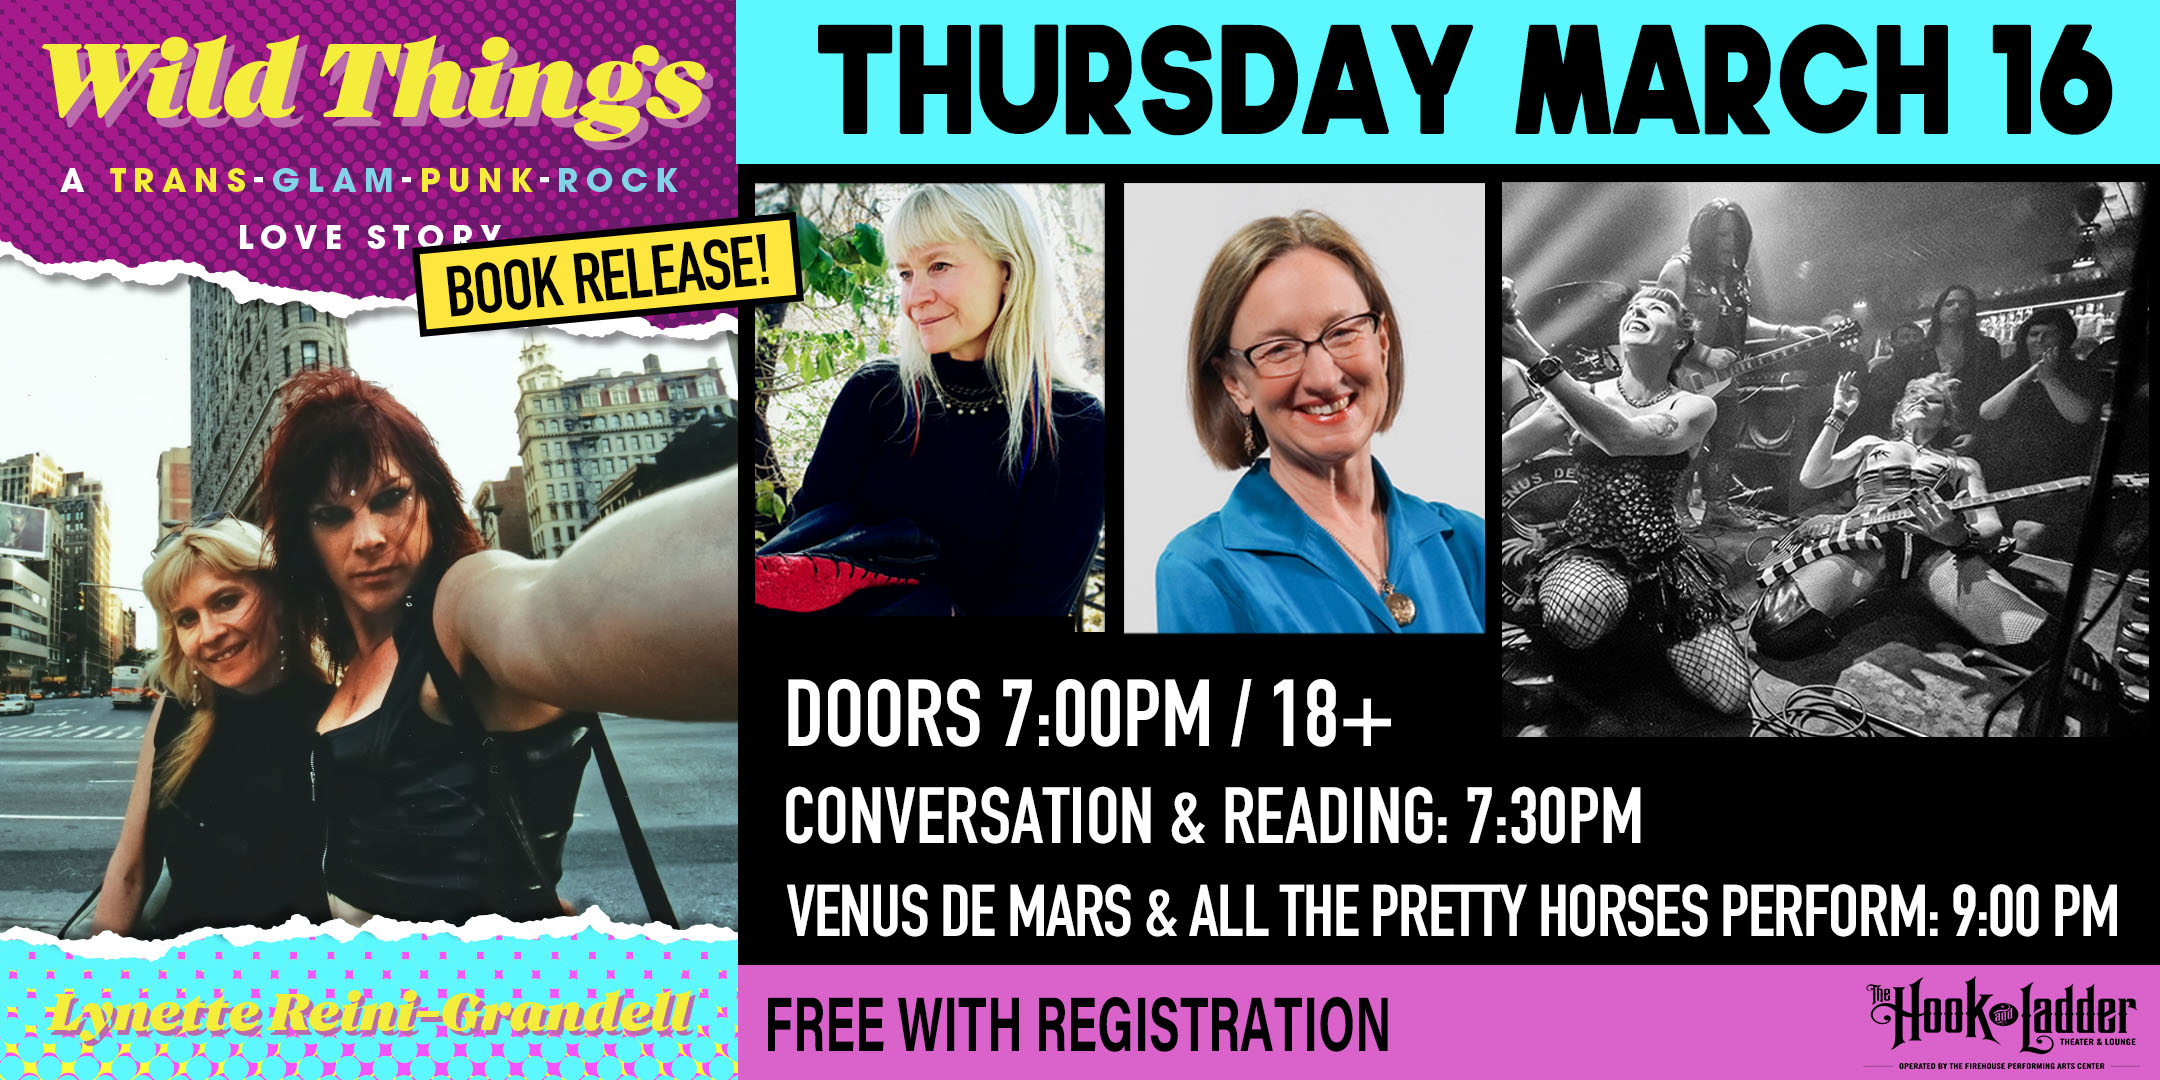 Wild Things: A Trans-Glam-Punk-Rock Love Story Book Release Event Thursday March 16 The Hook and Ladder Theater Doors 7:00pm :: 18+ Conversation and reading: 7:30 pm Venus de Mars and All the Pretty Horses perform: 9:00 pm